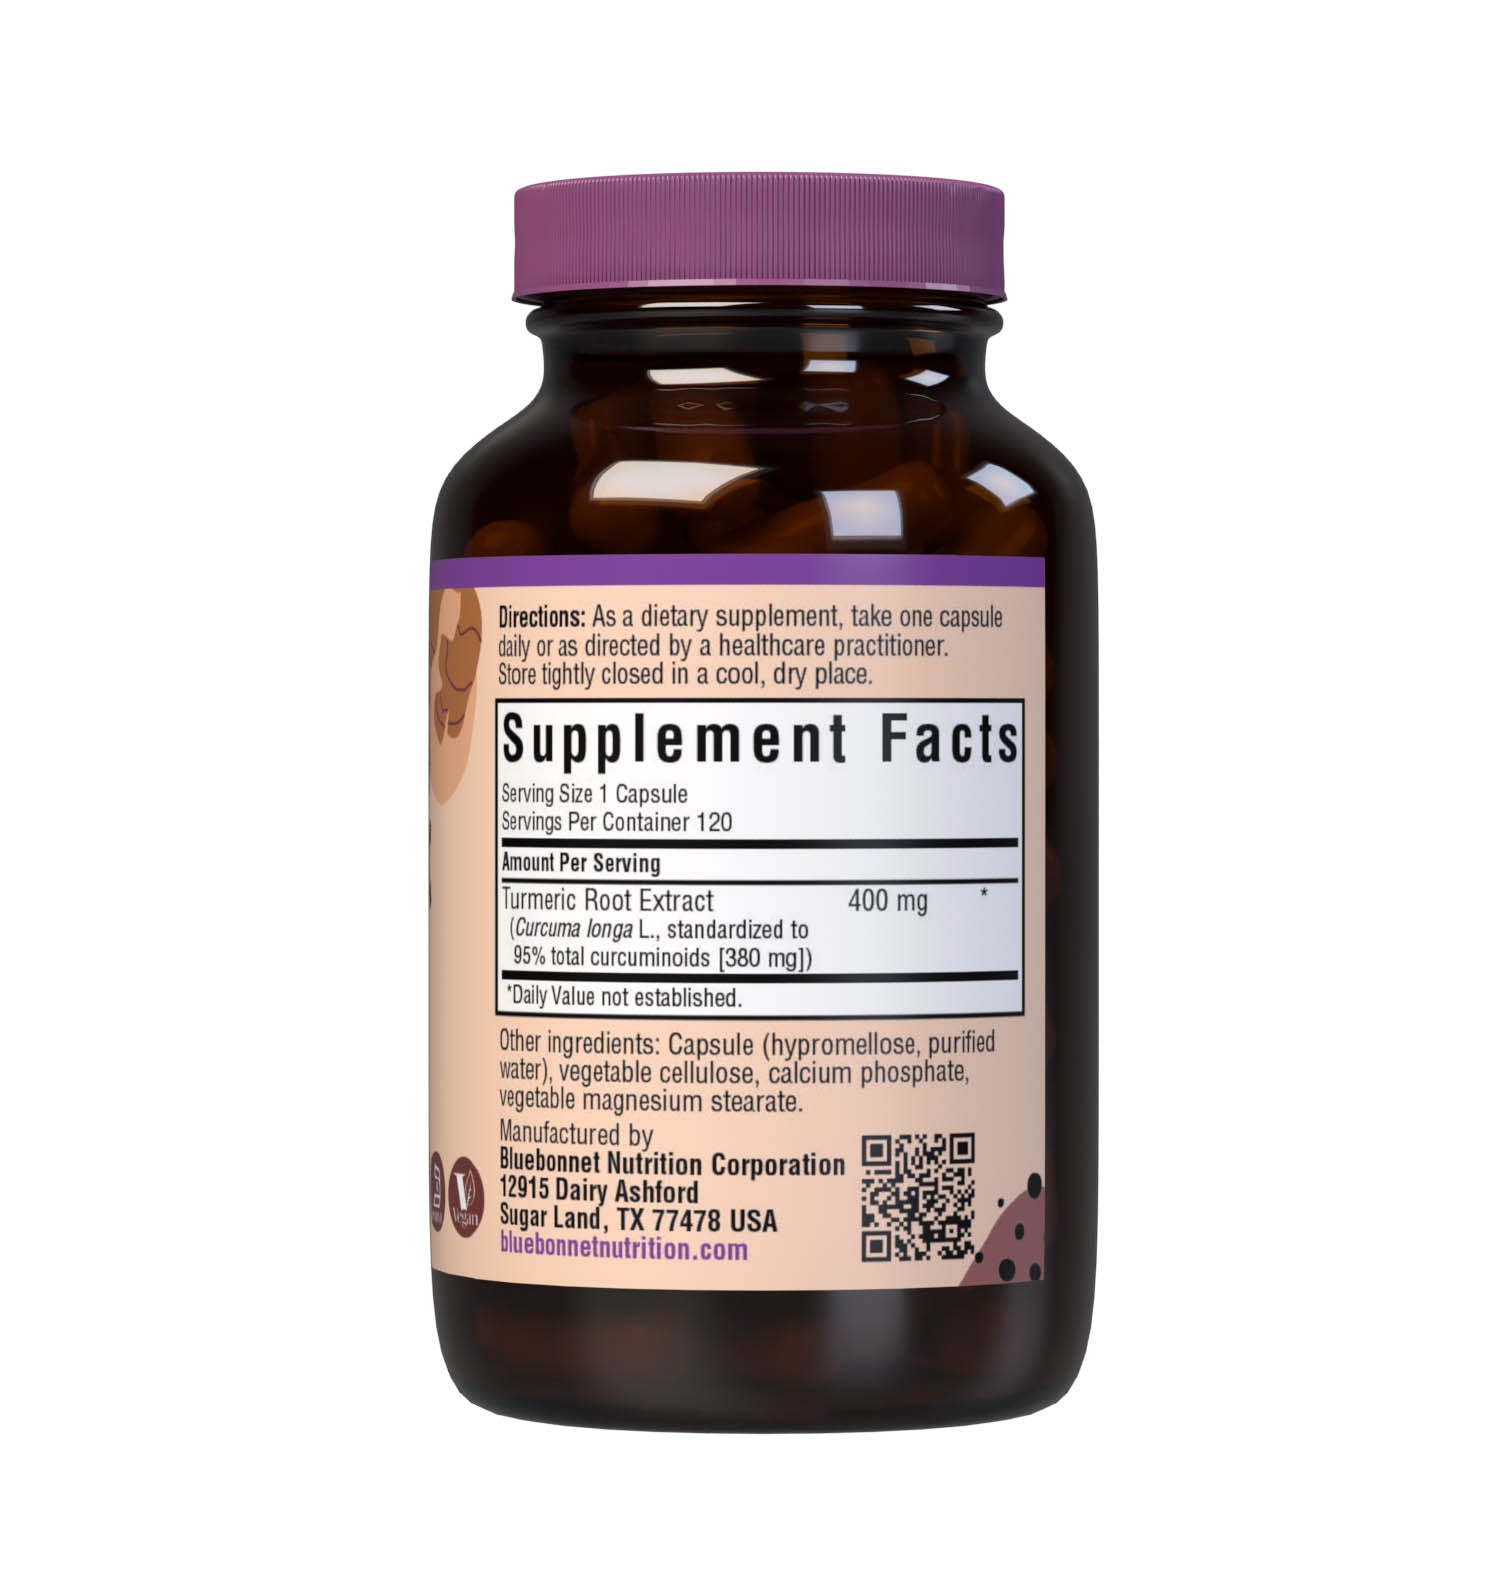 Bluebonnet’s Turmeric Root Extract 60 Capsules provide a standardized extract of total curcuminoids, the most researched active constituents found in turmeric. A clean and gentle water-based extraction method is employed to capture and preserve turmeric’s most valuable components. Supplement facts panel. #size_120 count